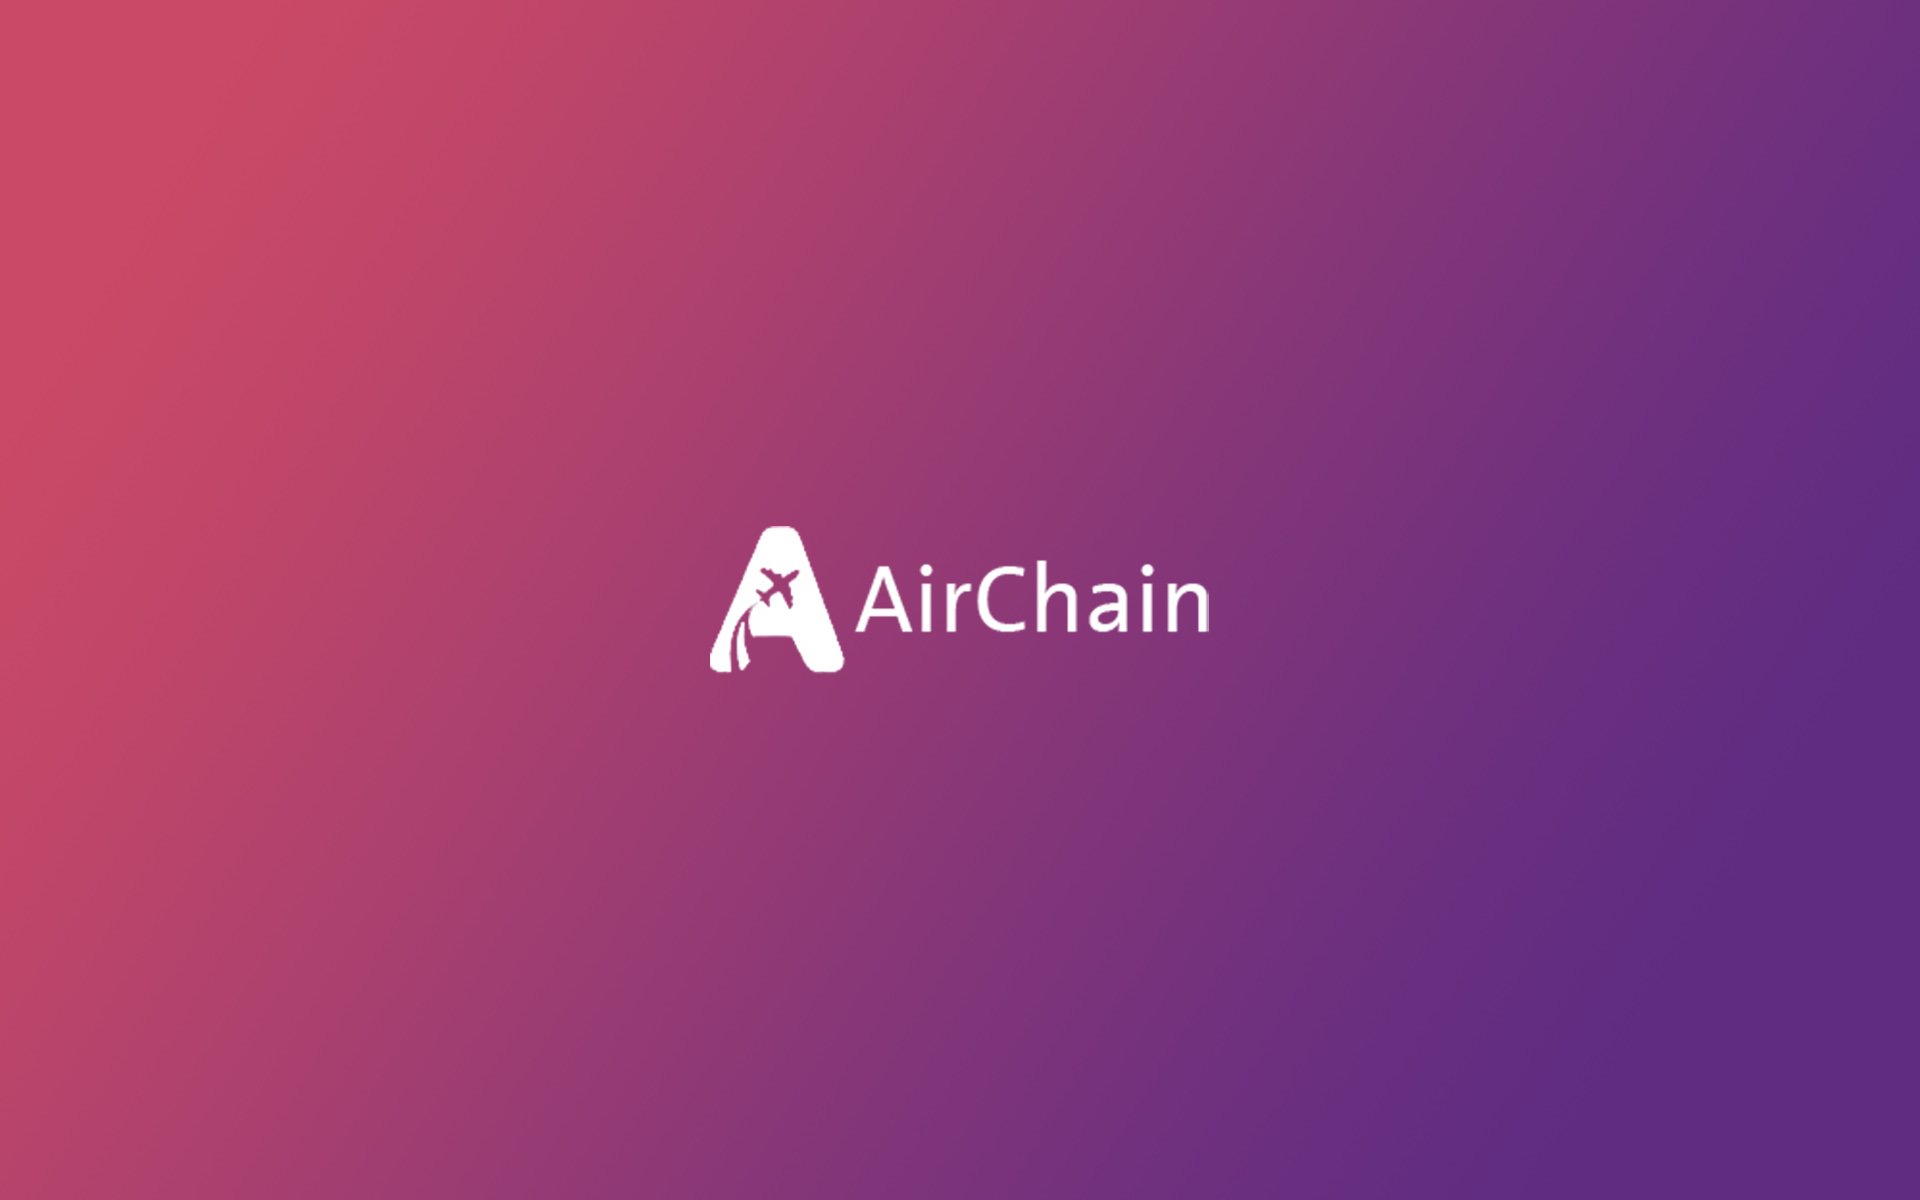 Airchain Network Introduces Mobile Application to Make the Air Freight Sector Transparent, Safe and Flexible like Never Before